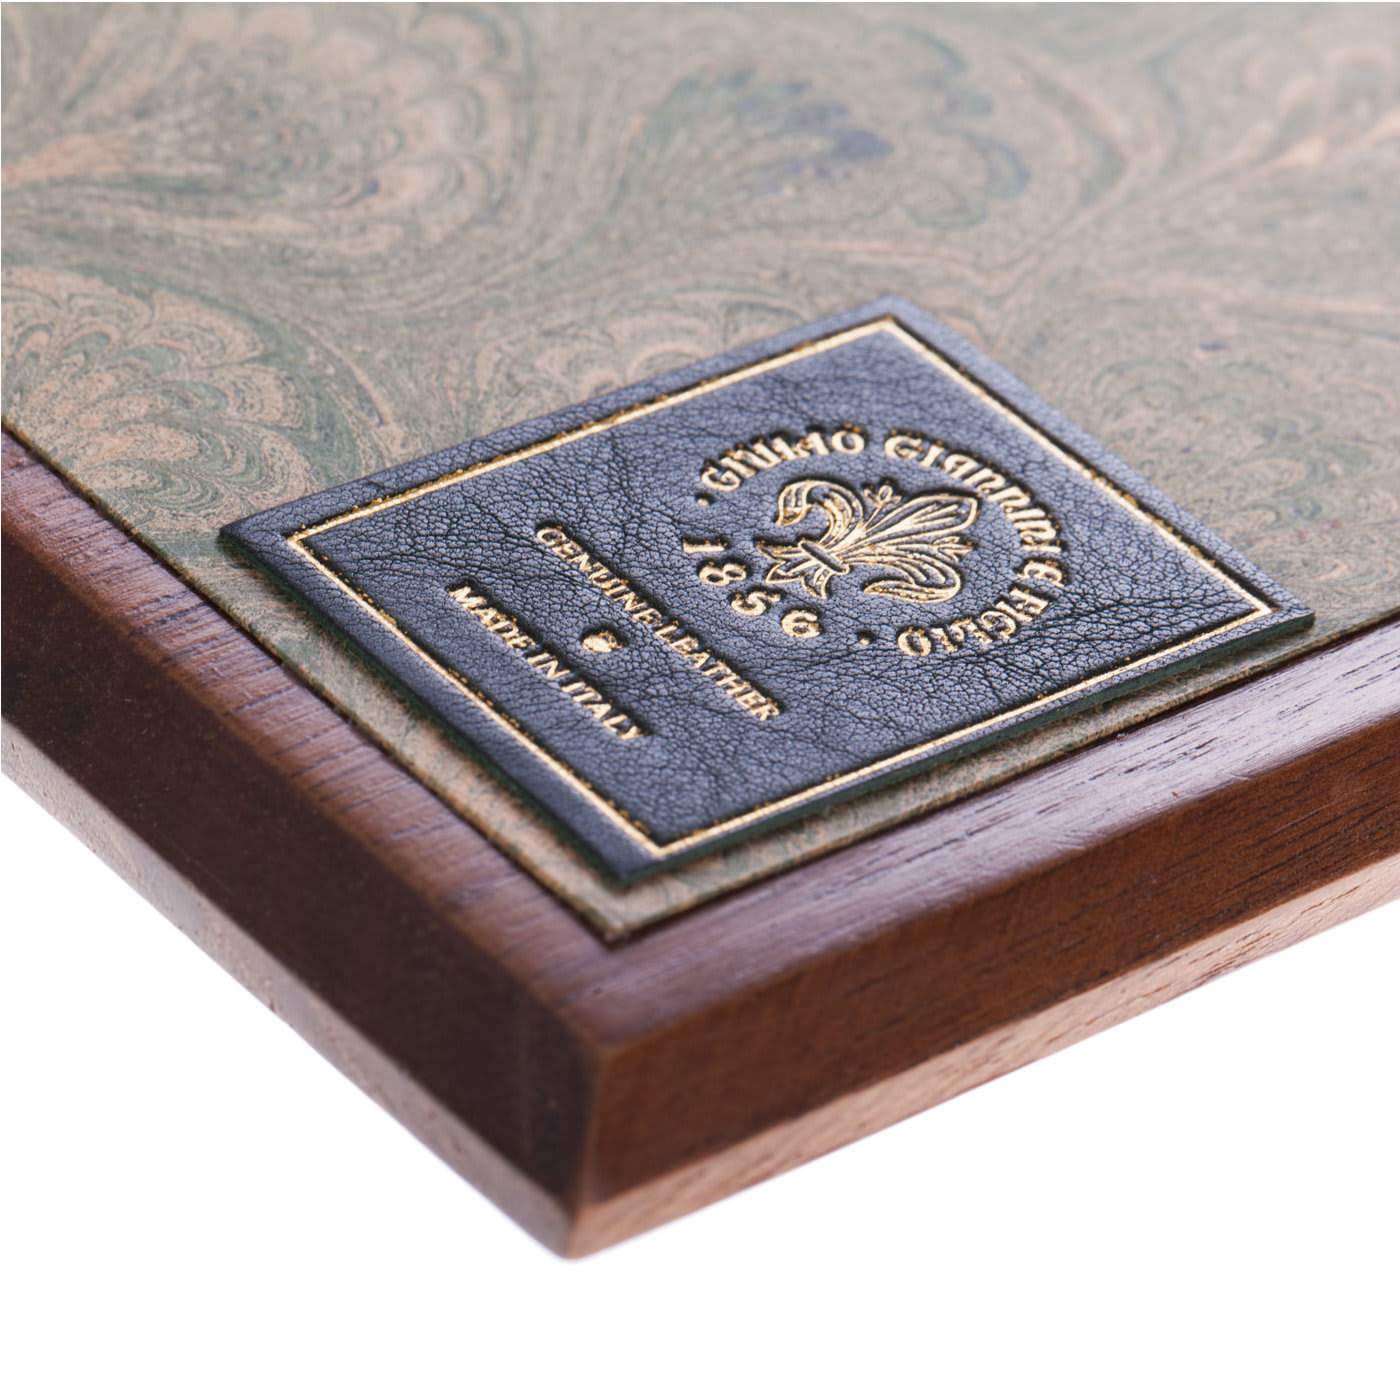 1600 Wood and Green Leather Book - Giannini